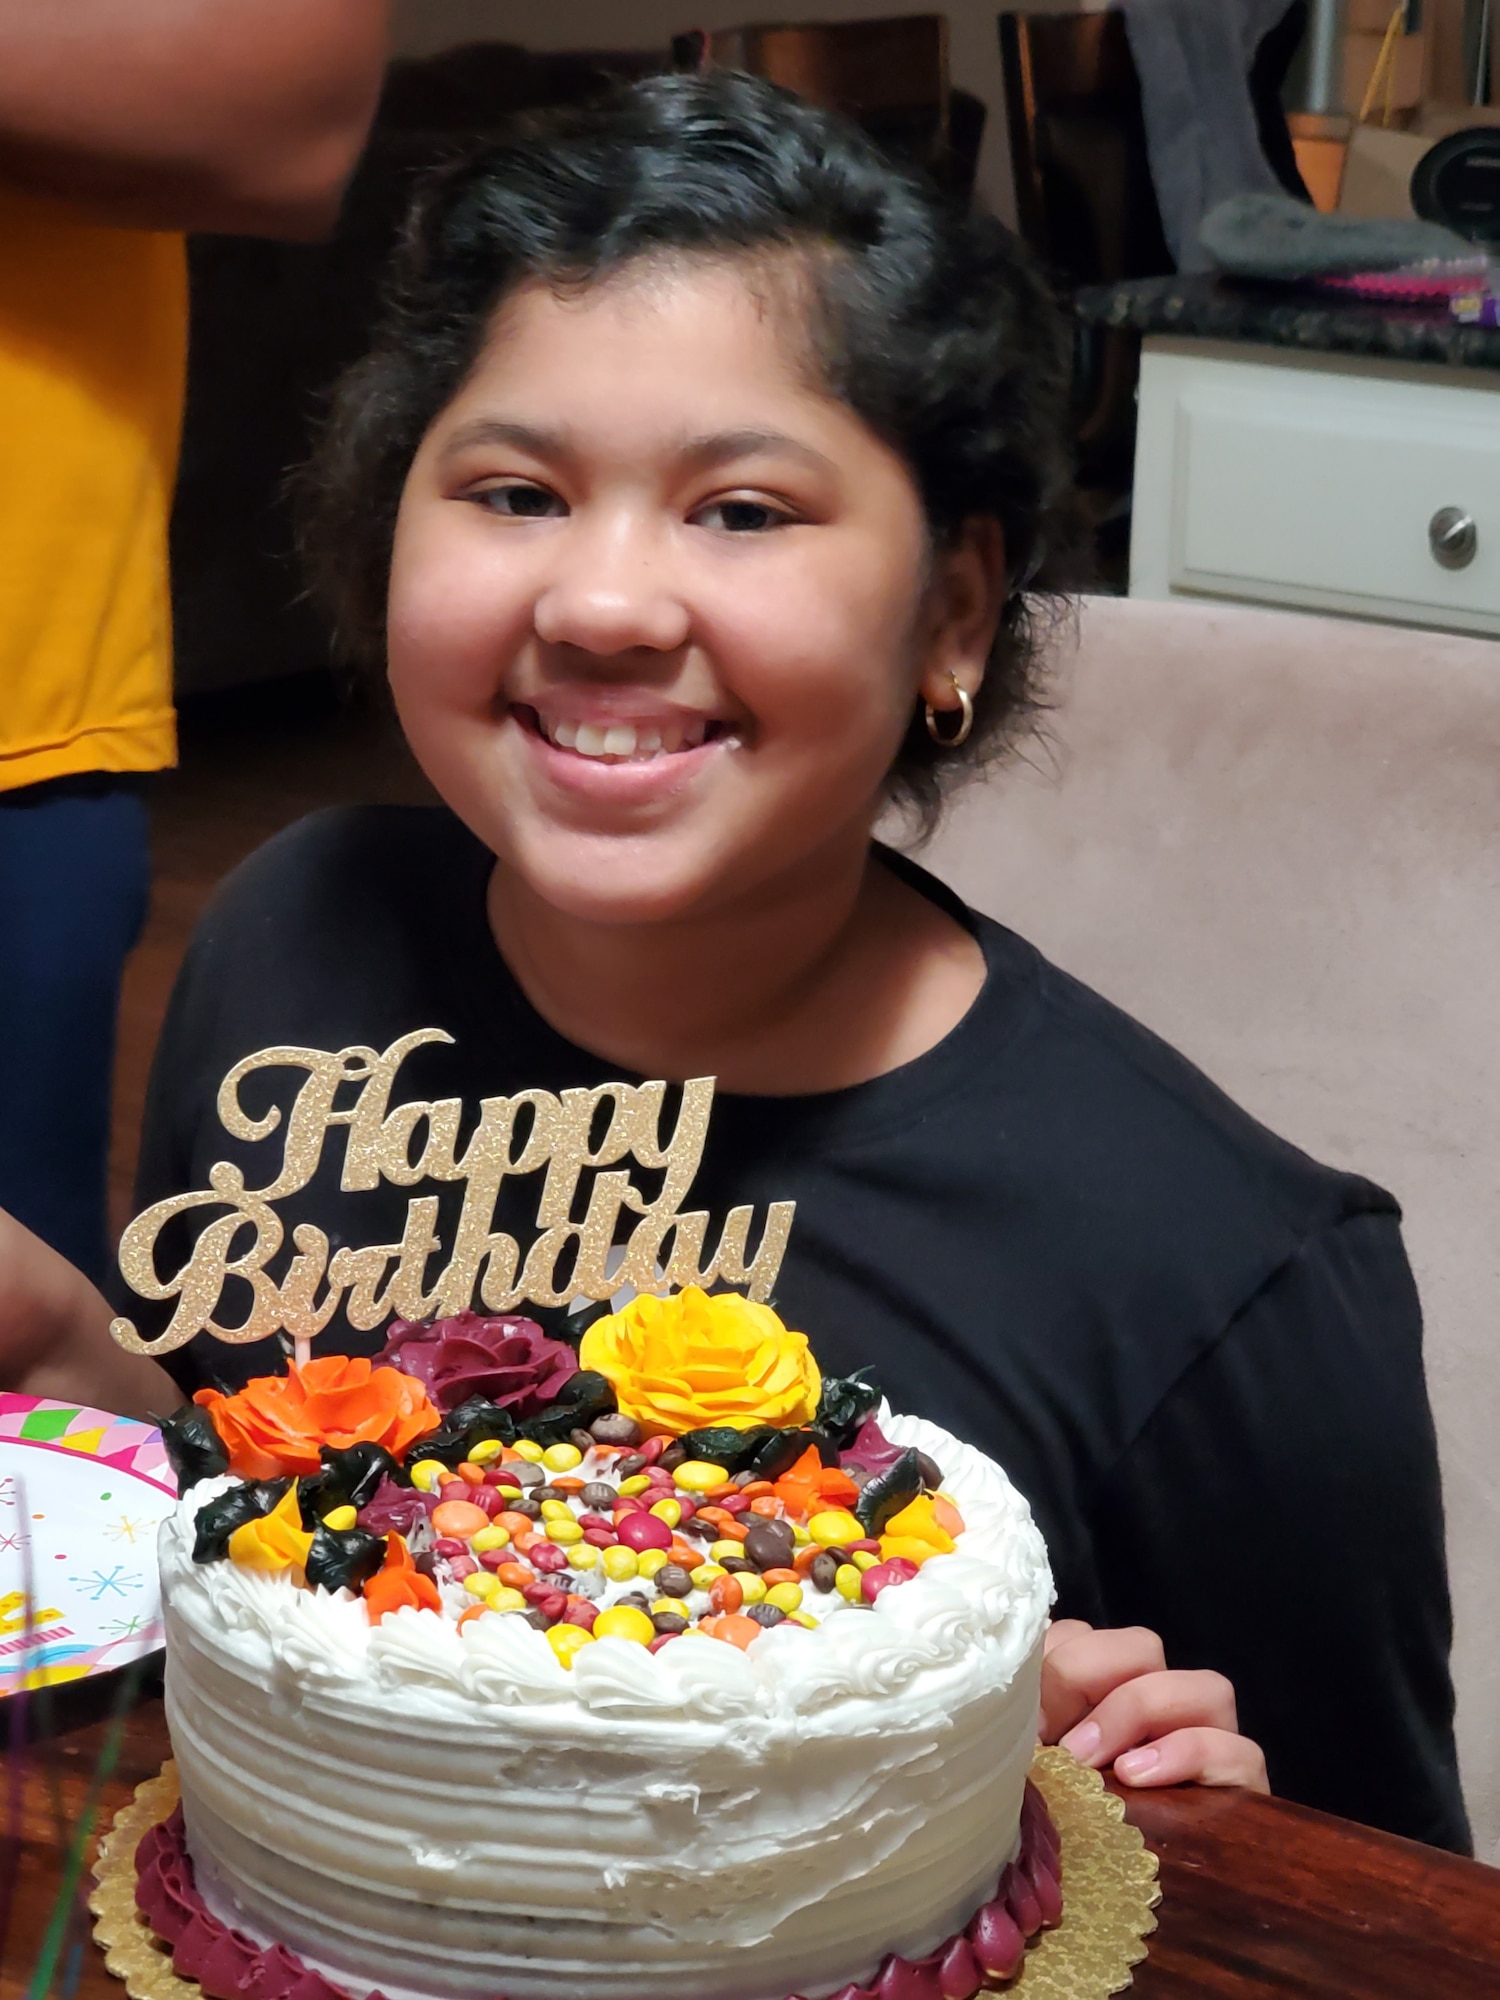 Jayda SoileauGobert, Tech. Sgt. Justin SoileauGobert’s daughter, poses with a birthday cake in Abilene, Texas, Nov. 15, 2020.Although diagnosed with acute lymphoblastic leukemia on July 14, 2019.